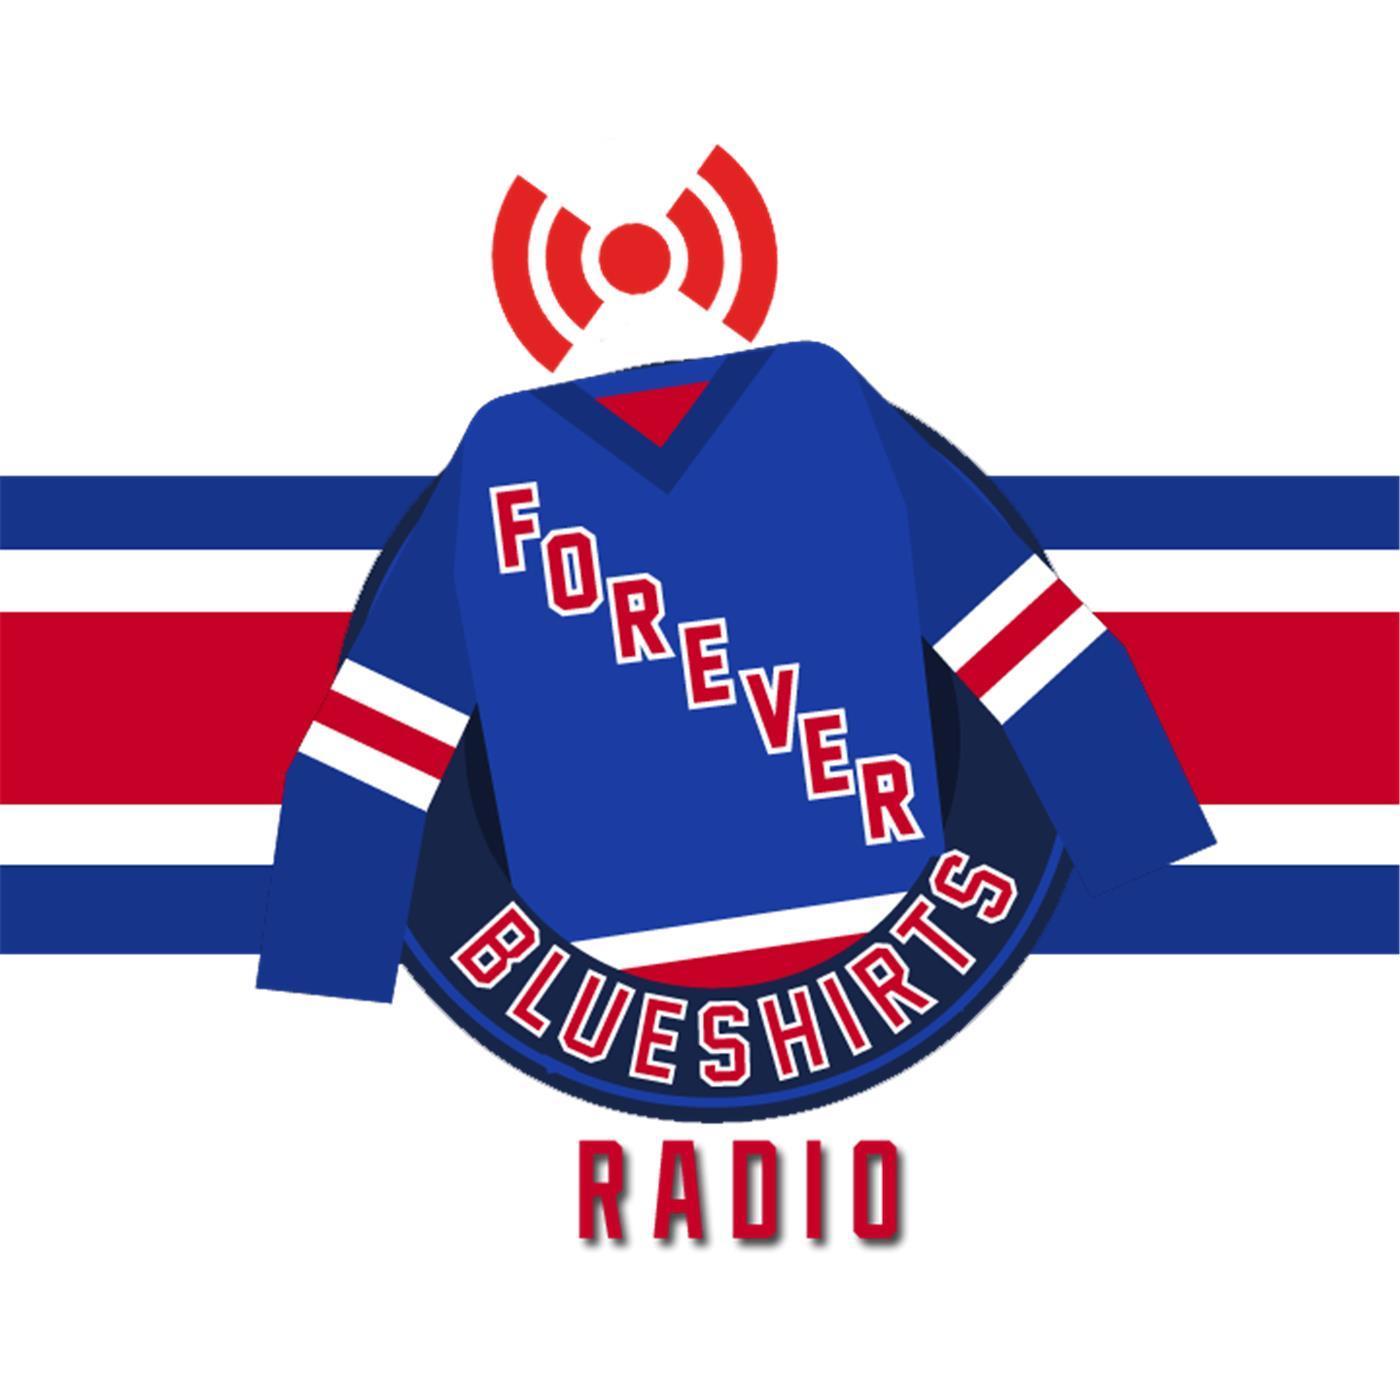 Forever Blueshirts Radio - Rangers prospects at WJC, draft trade rumors, and an epic rant about ads on jerseys